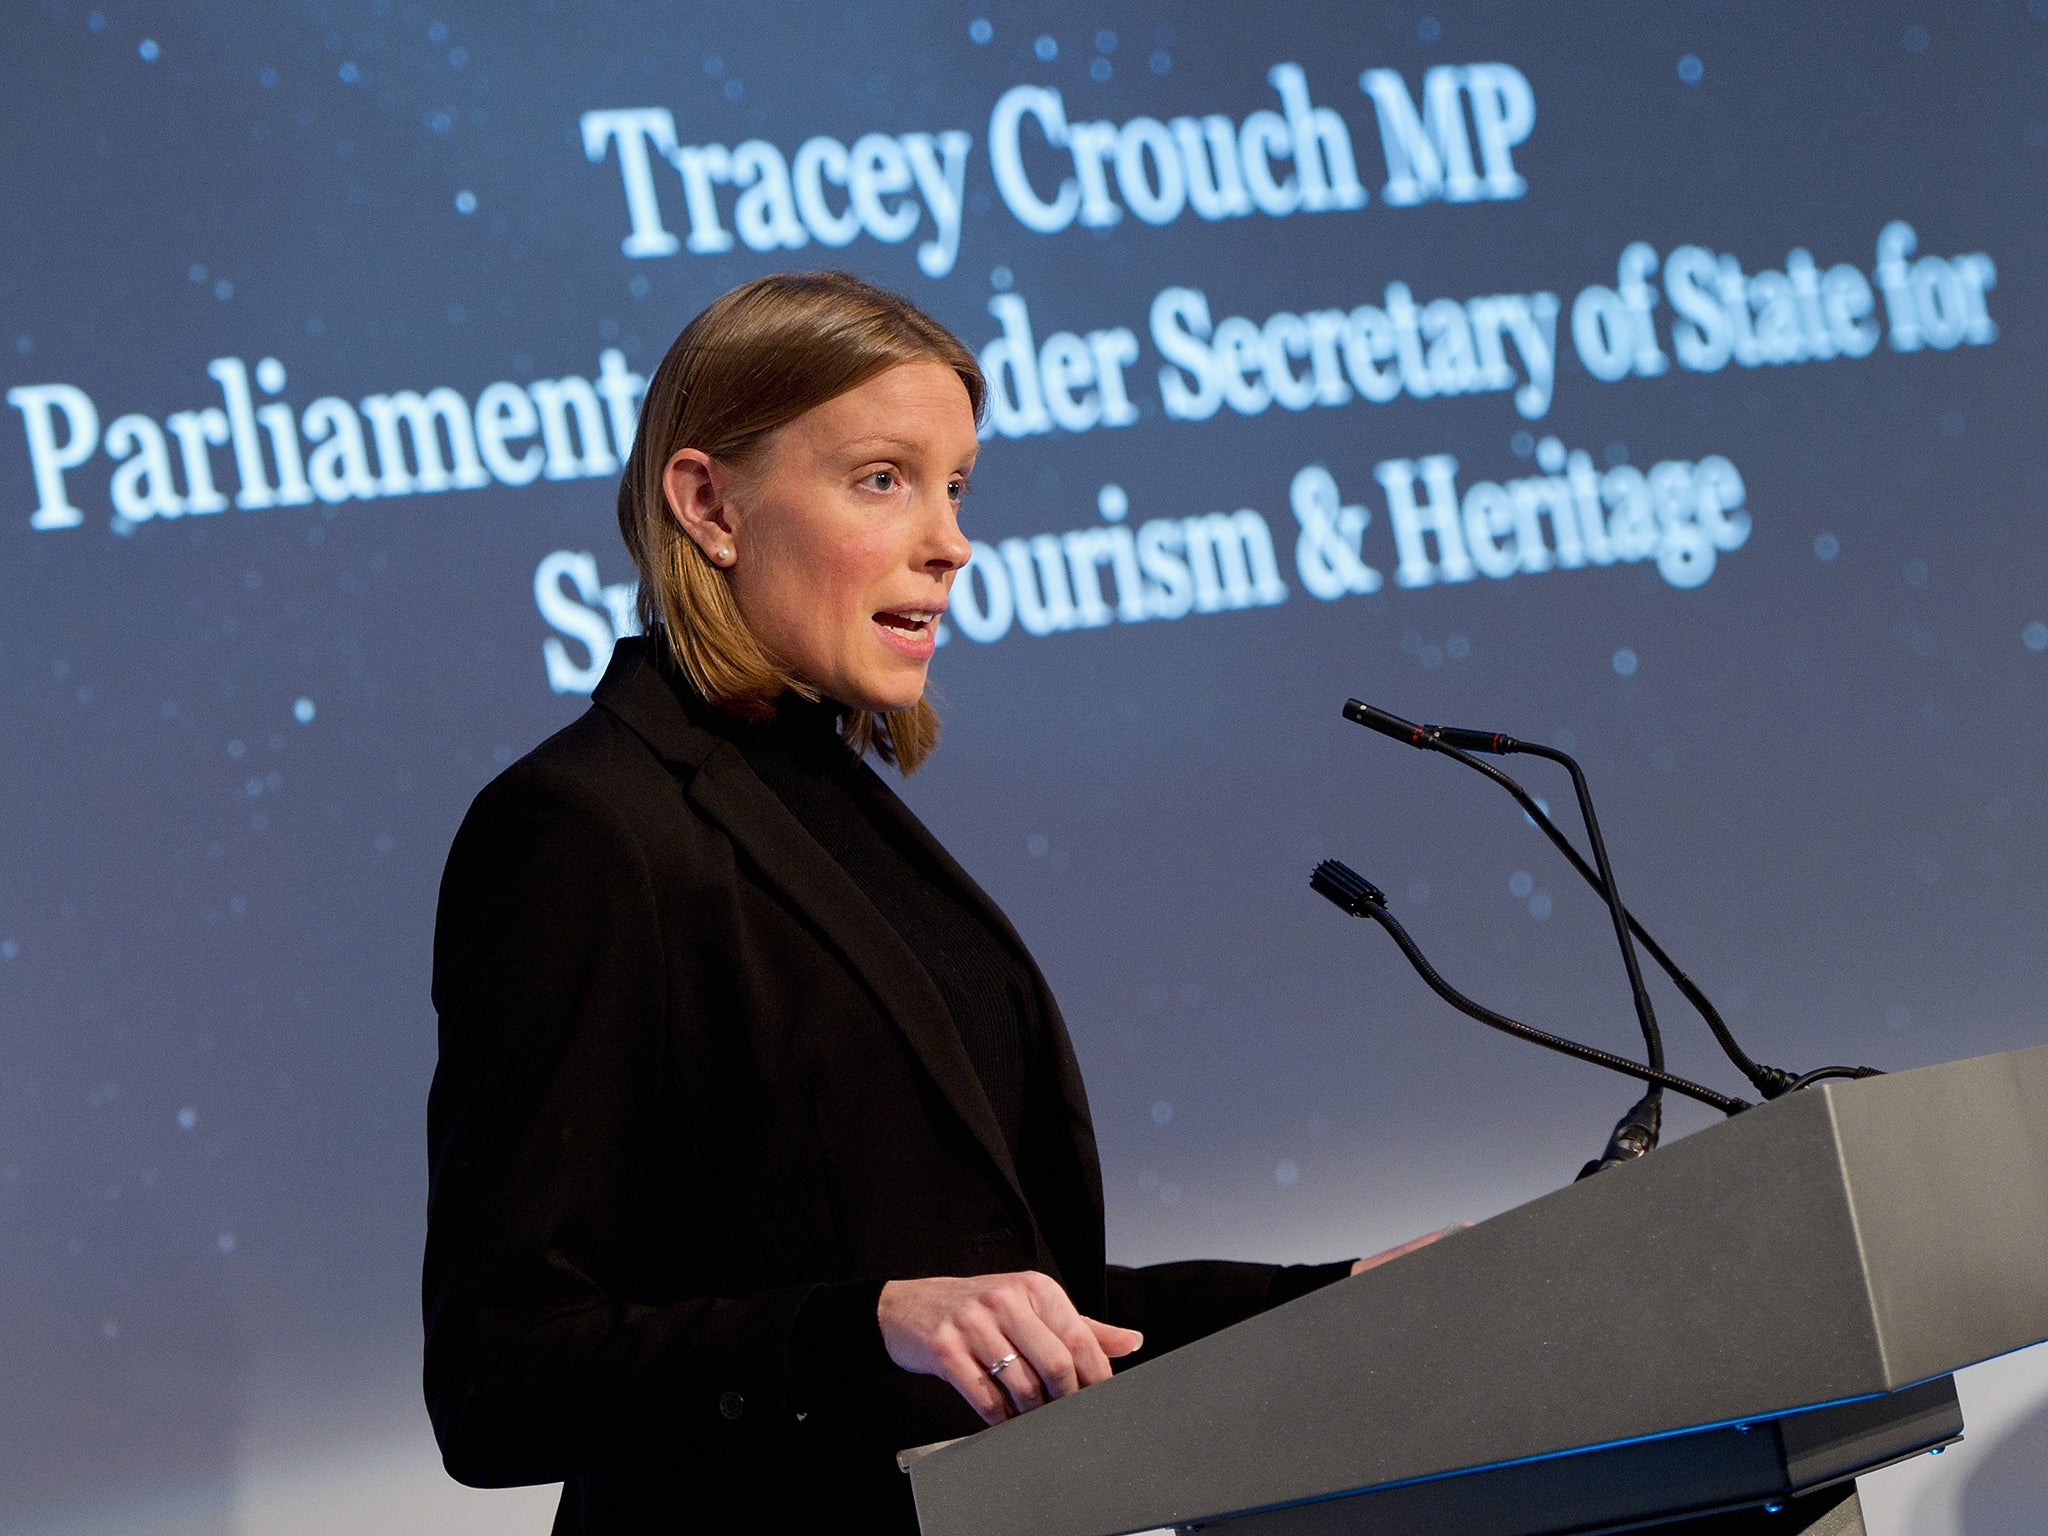 What was unusual about Tracey Crouch’s resignation was the unanimity of support for her